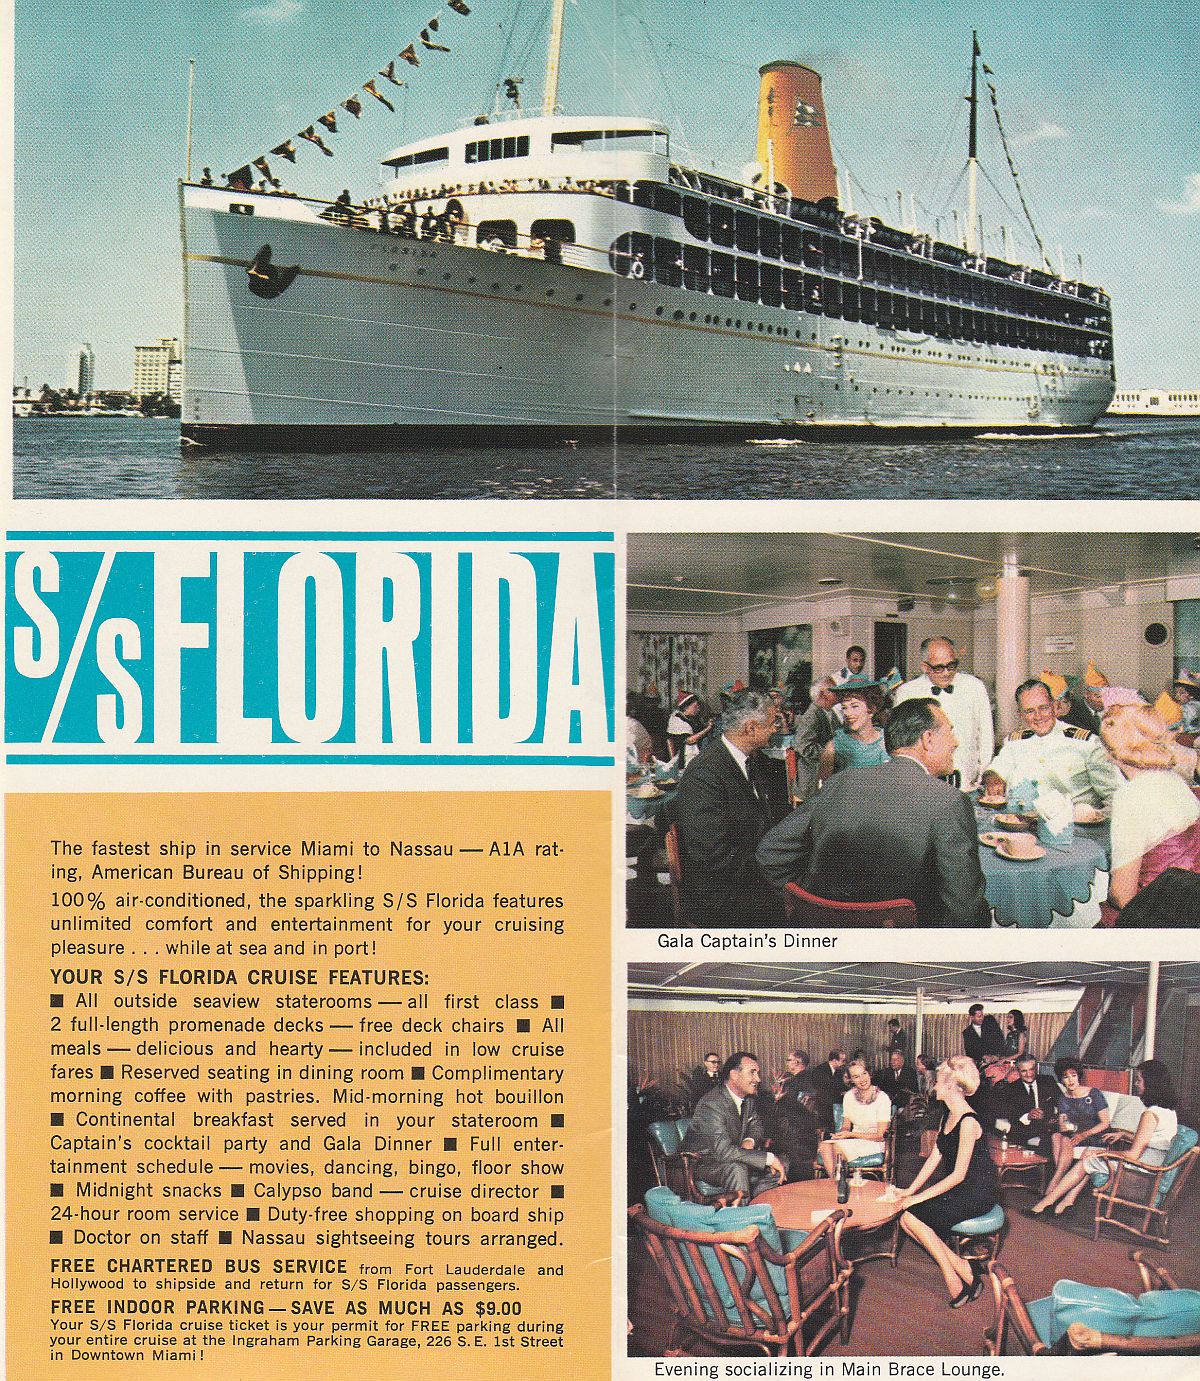 ss Florida About ss Florida: Your ss Florida cruise features; Gala Captain's dinner; Evening socializing in Main Brace Lounge